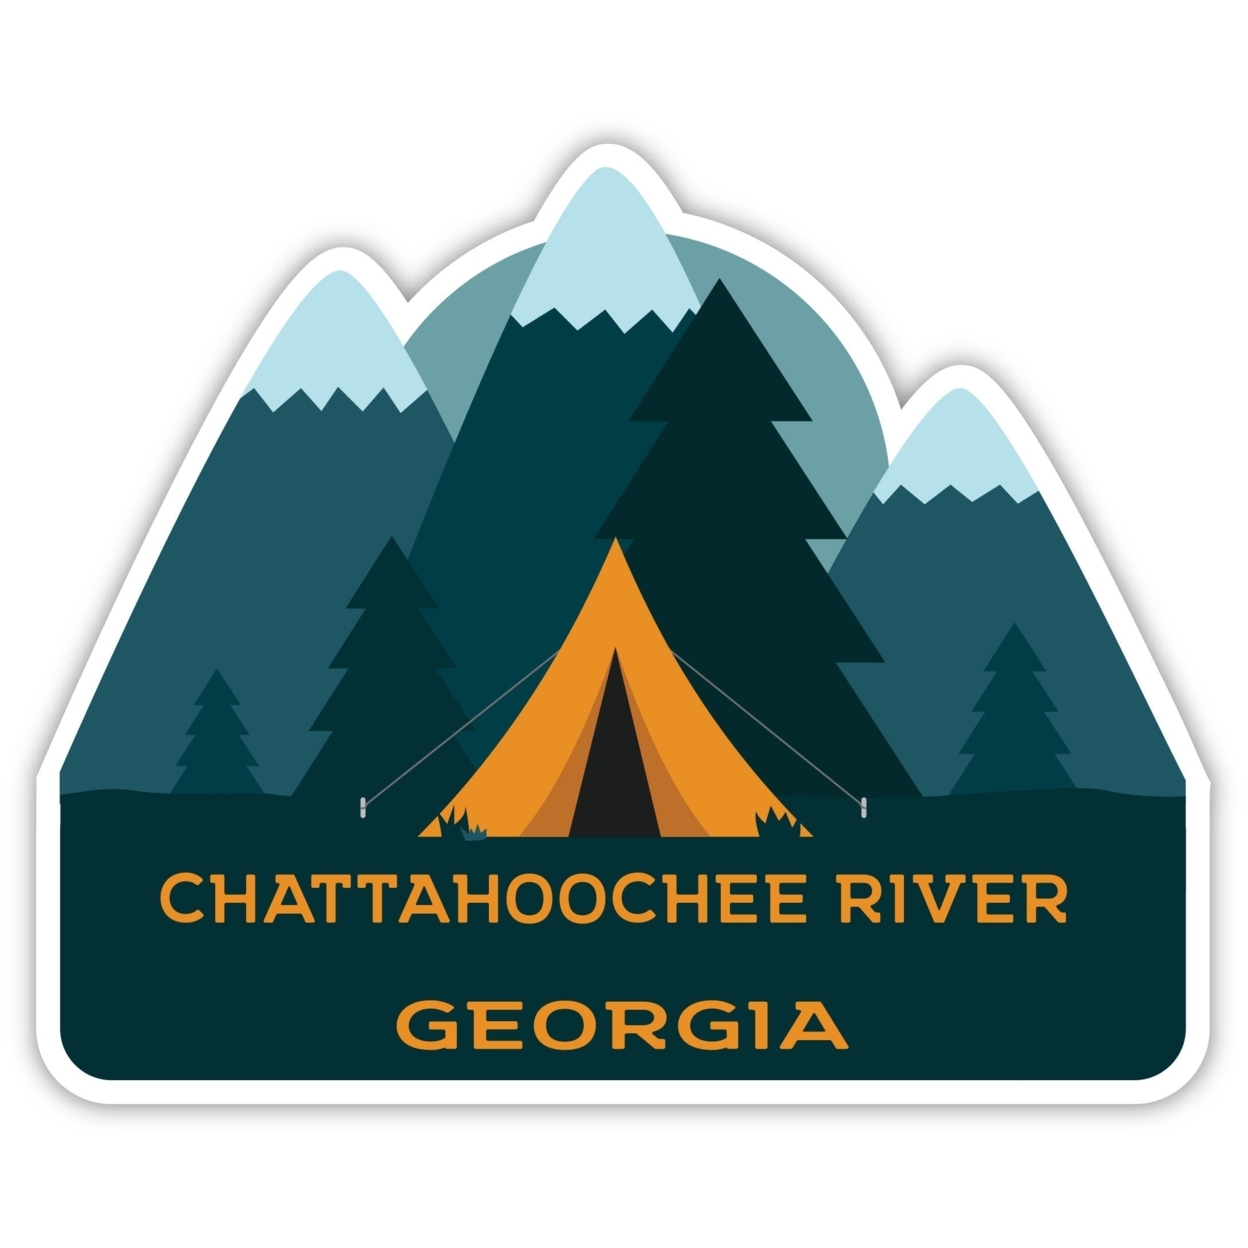 Chattahoochee River Georgia Souvenir Decorative Stickers (Choose Theme And Size) - 4-Pack, 8-Inch, Tent